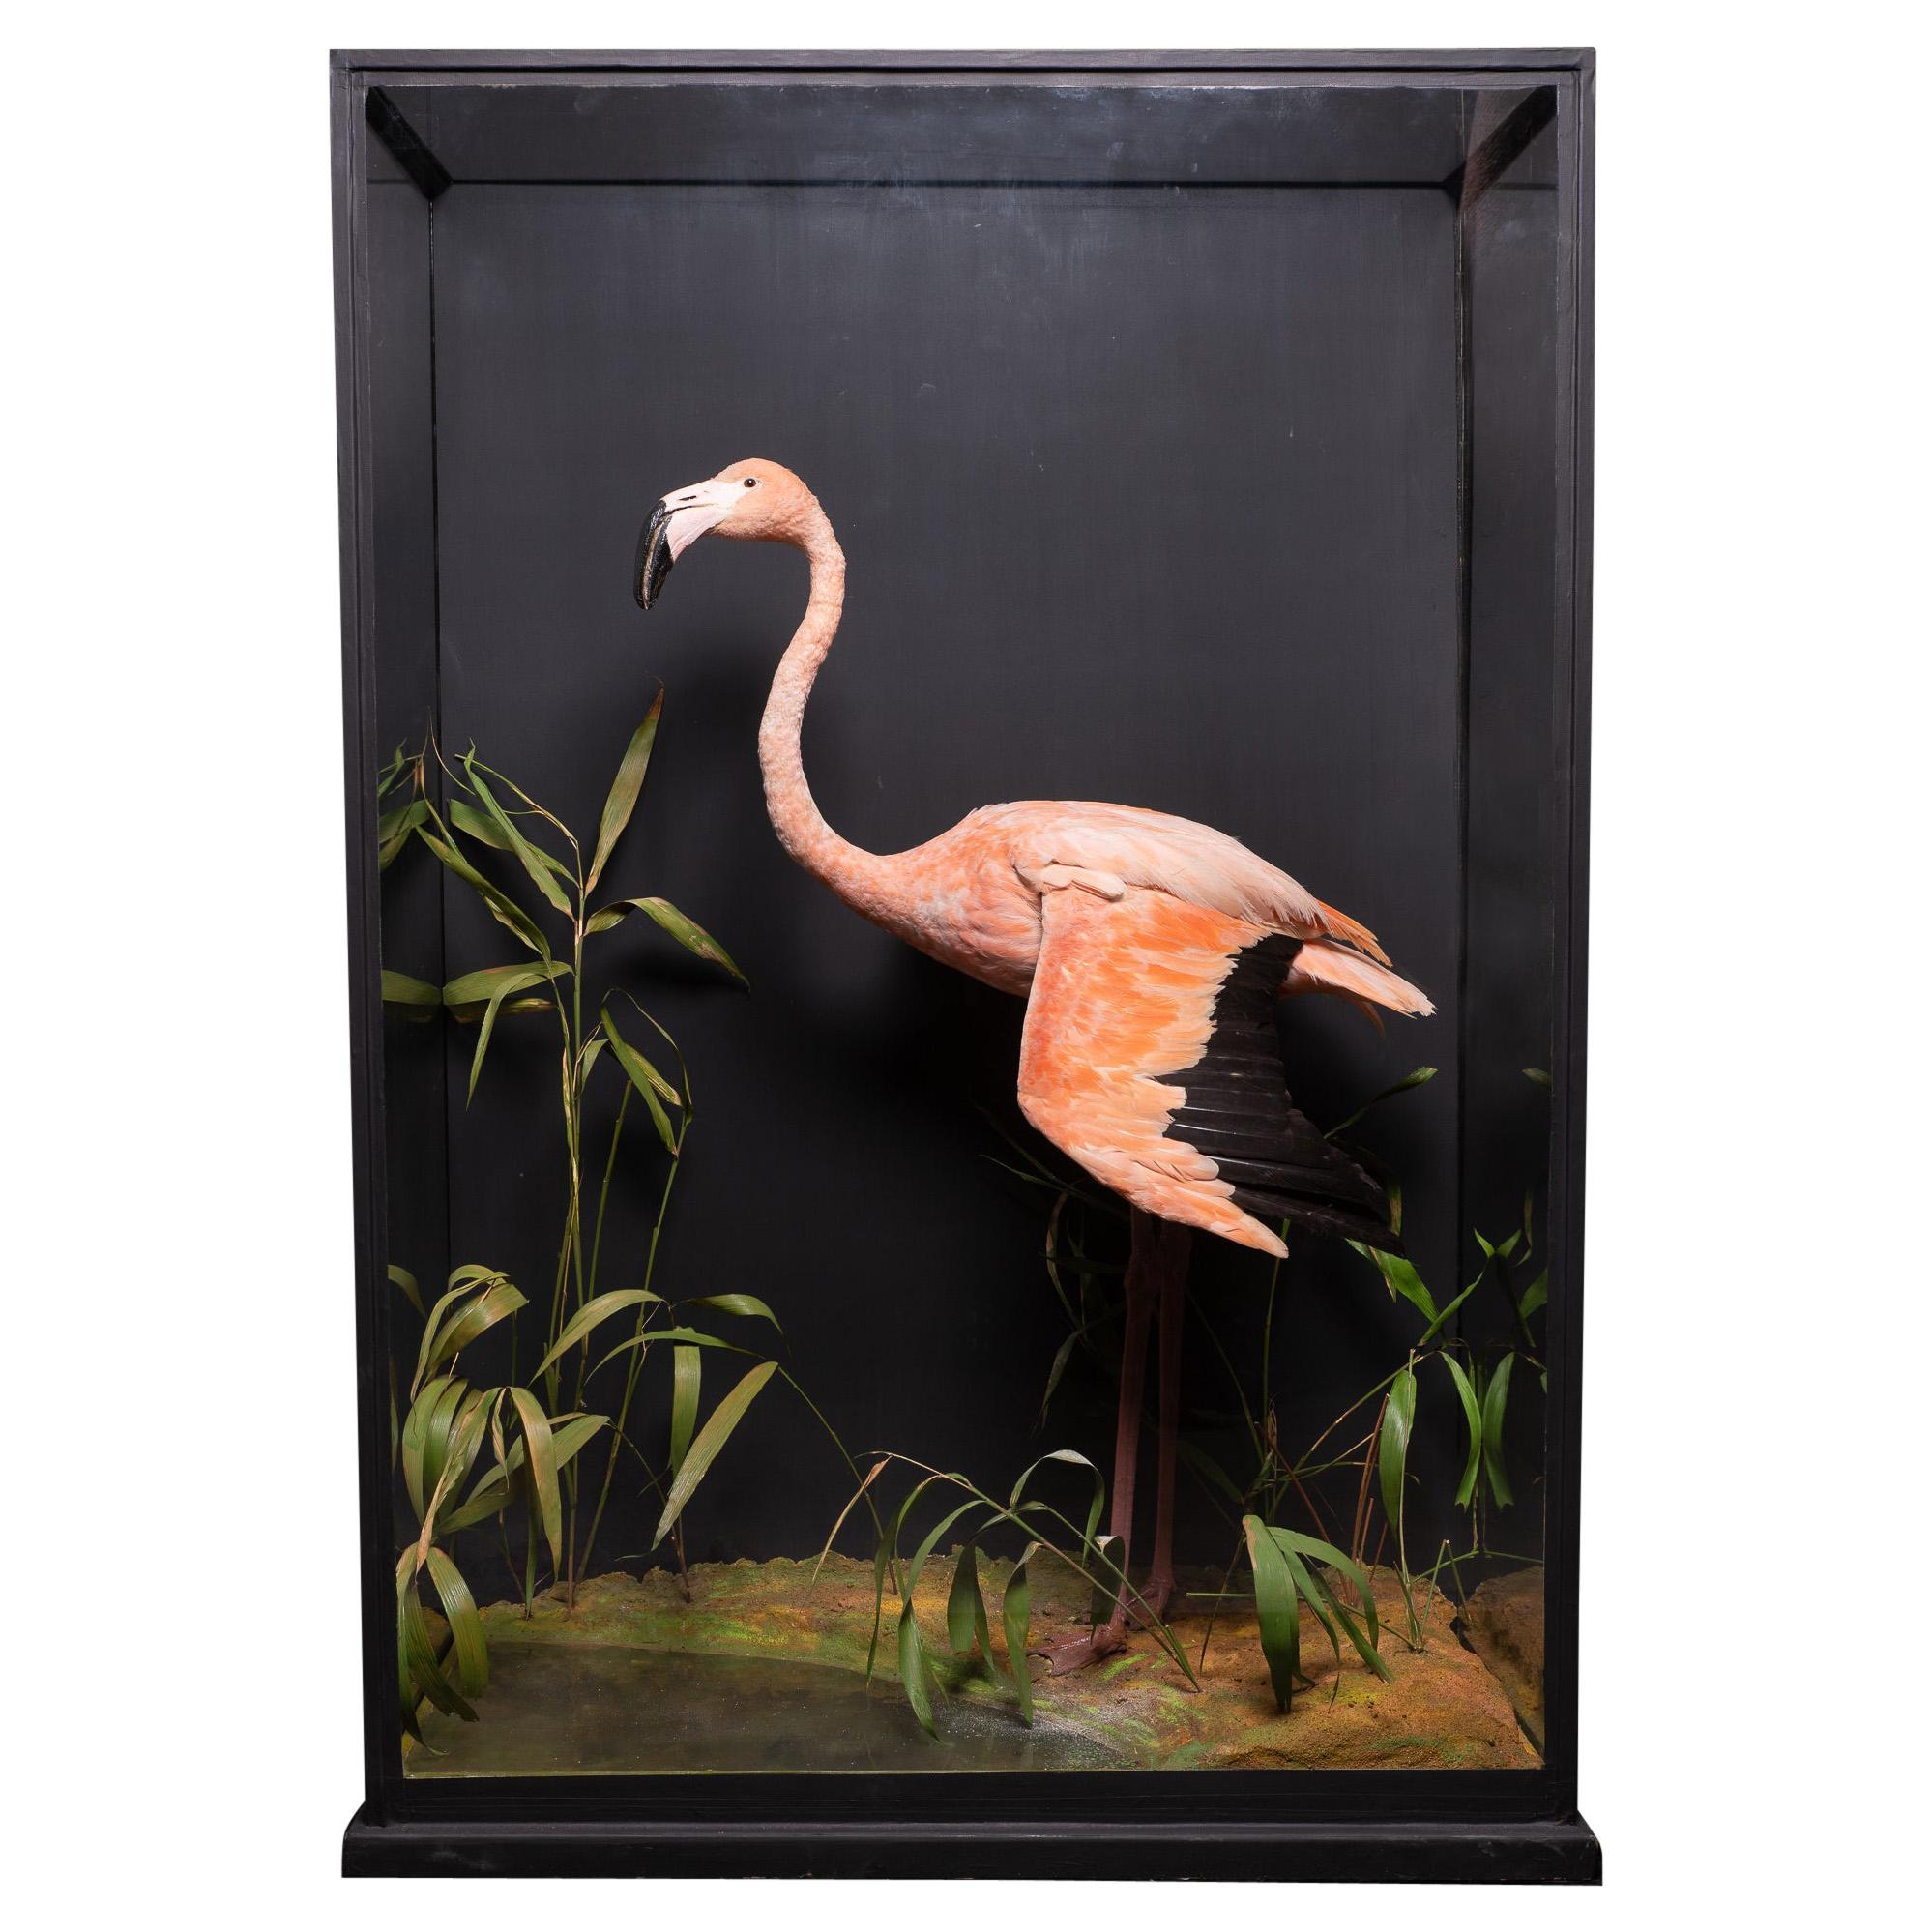 Rowland Ward Glazed Case with Flamingo in a Naturalistic Setting